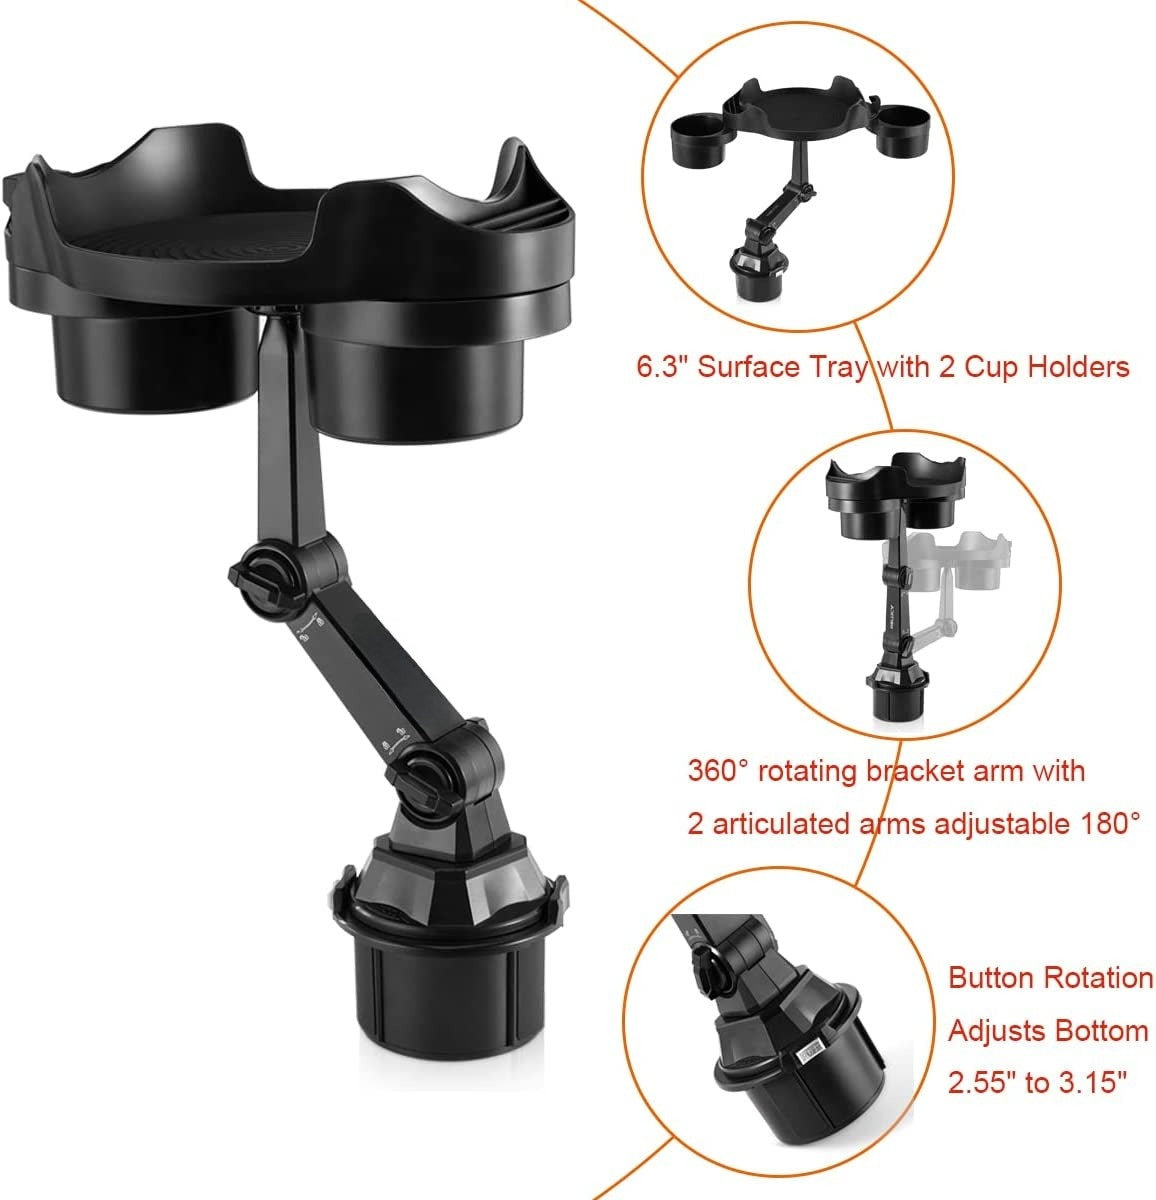 Cup Holder Expander for Car, 360 Degrees Rotate Adjustable 6.3 inches Surface Car Tray Table and Drink Holders with 3 Coaster, Car Cup Holder Tray Apply to All Auto Models